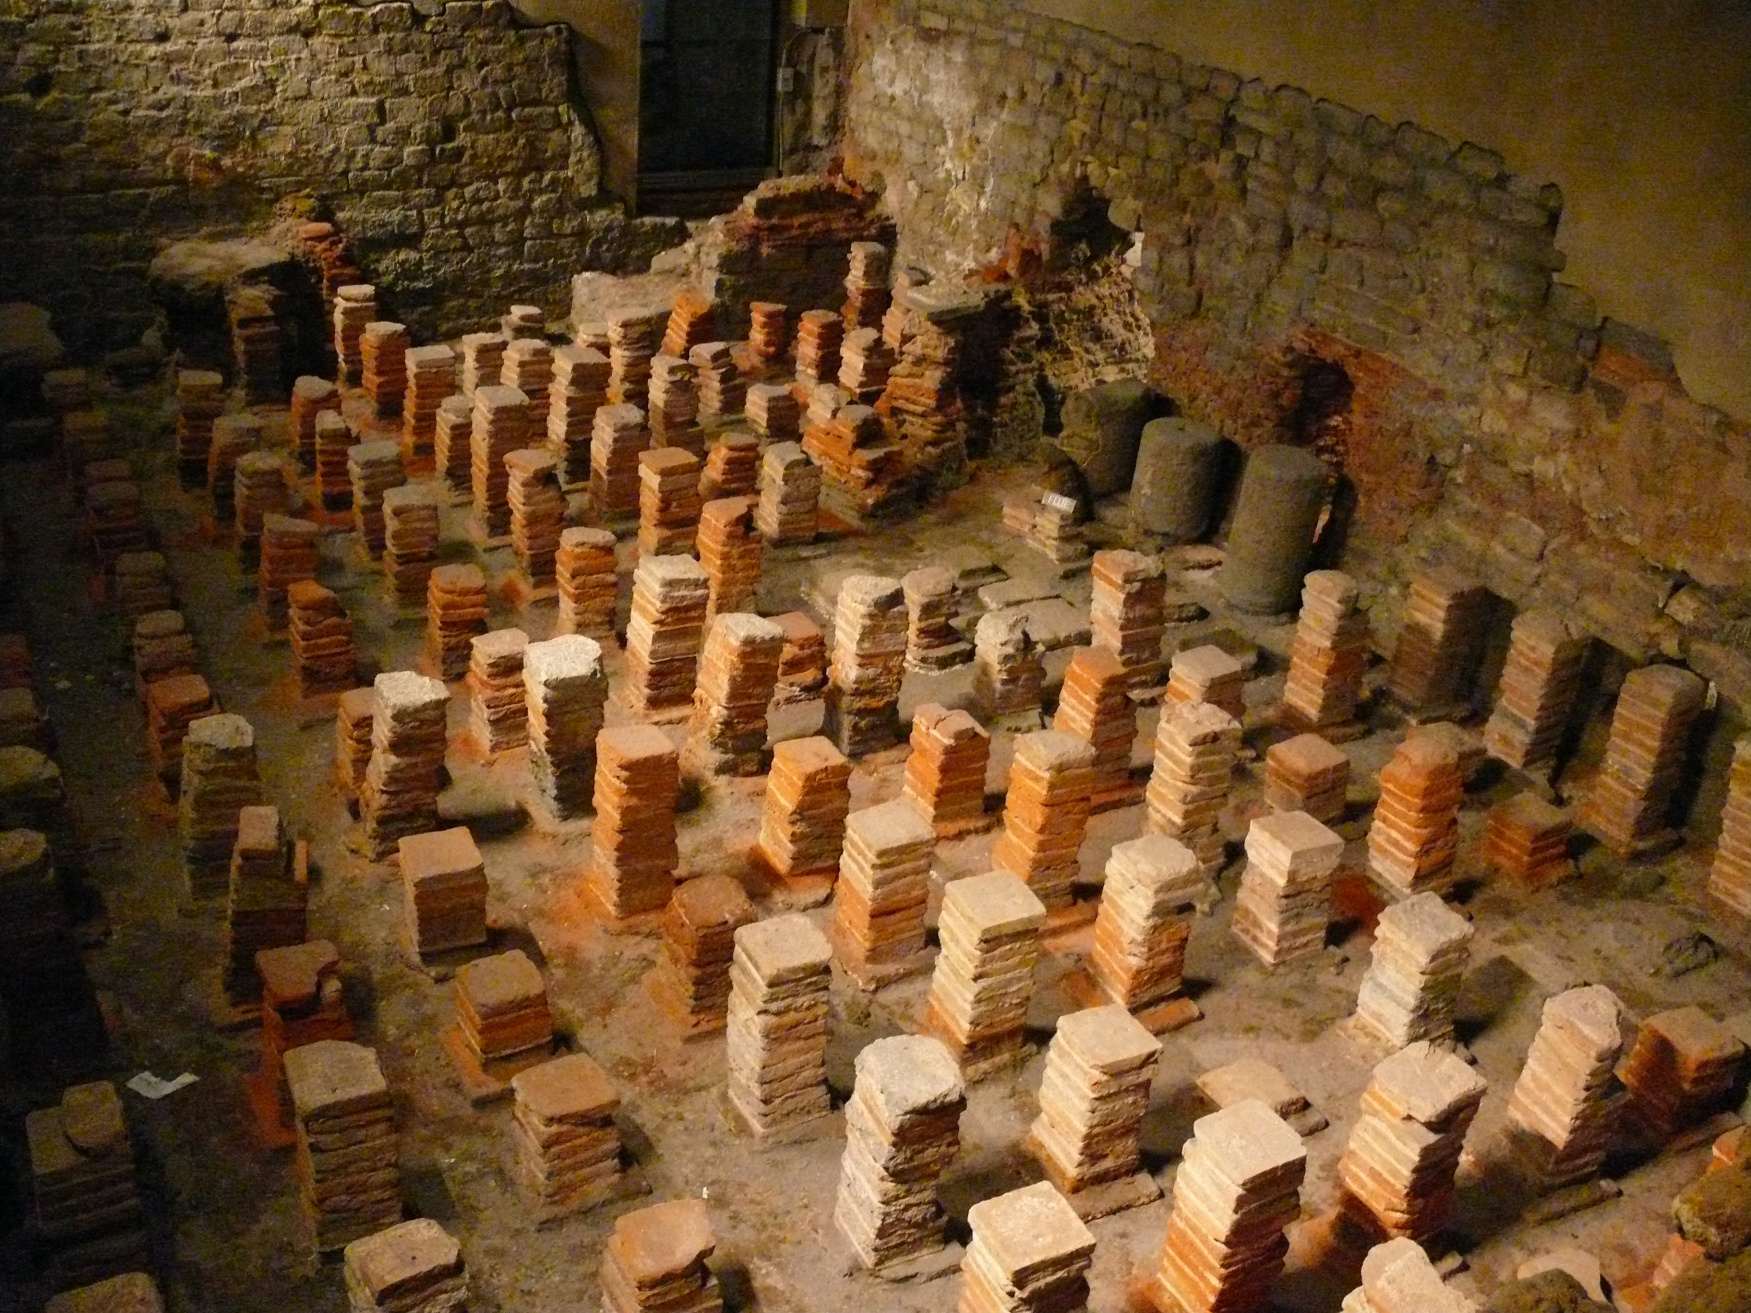 A hypocaust (central heating system)